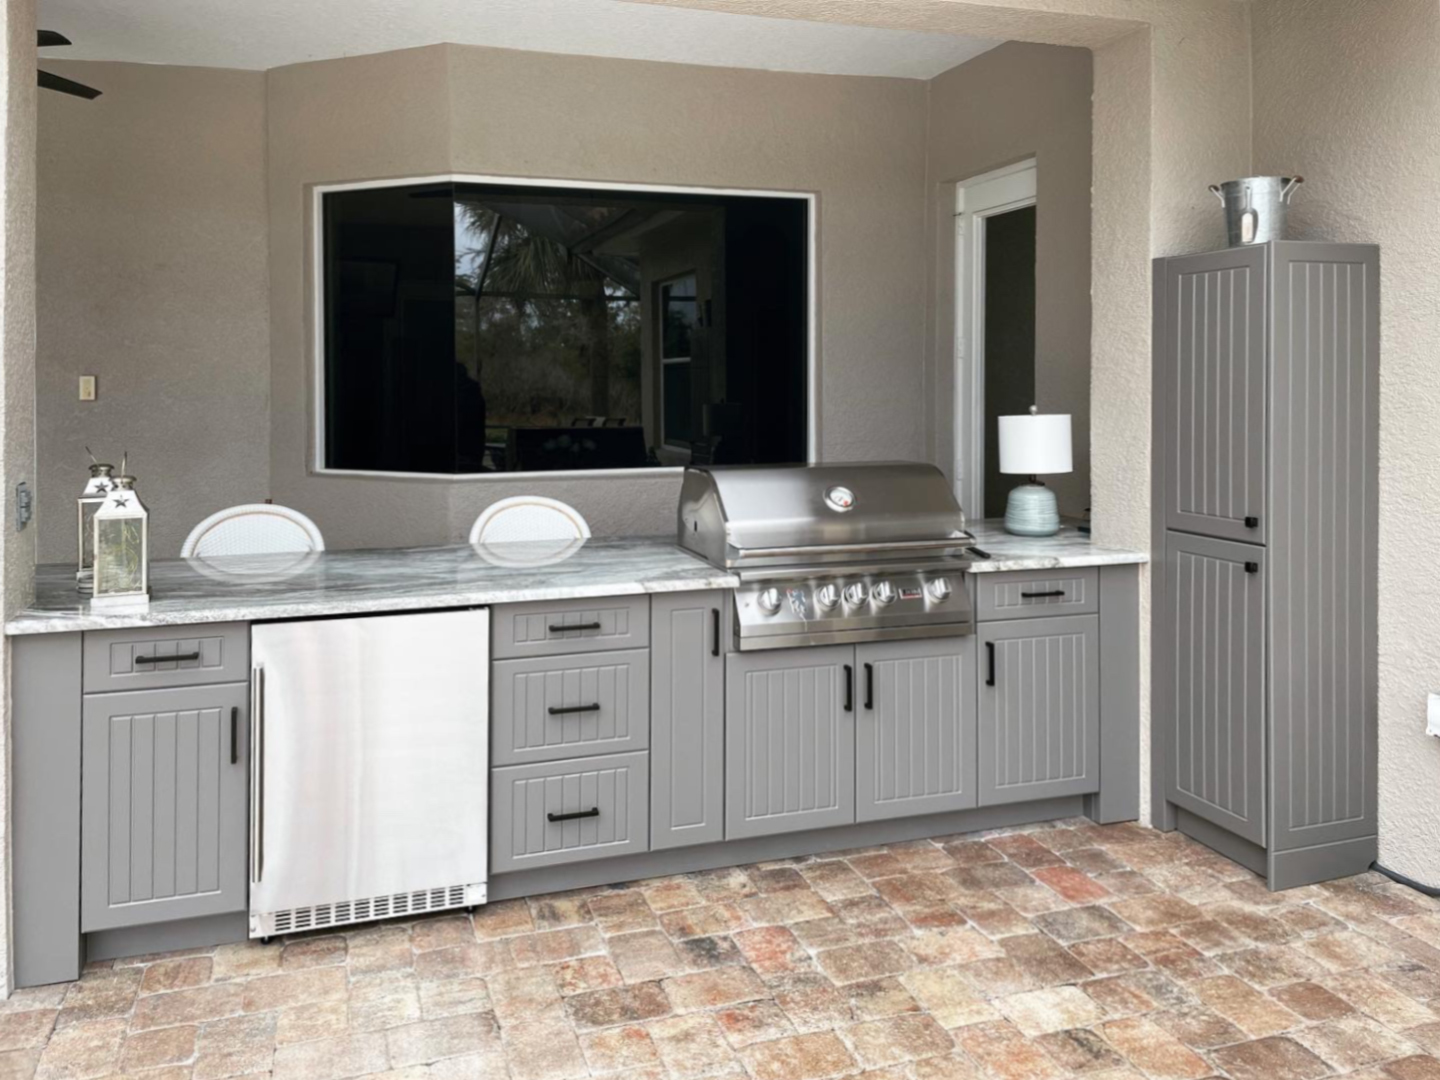 OUTDOOR KITCHEN 19. Custom outdoor kitchen ins Sarasota, FL. Kitchen features slate grey, v-groove style doors. Appliances include Lion grill, Azure stainless front refrigerator and black bar pulls.